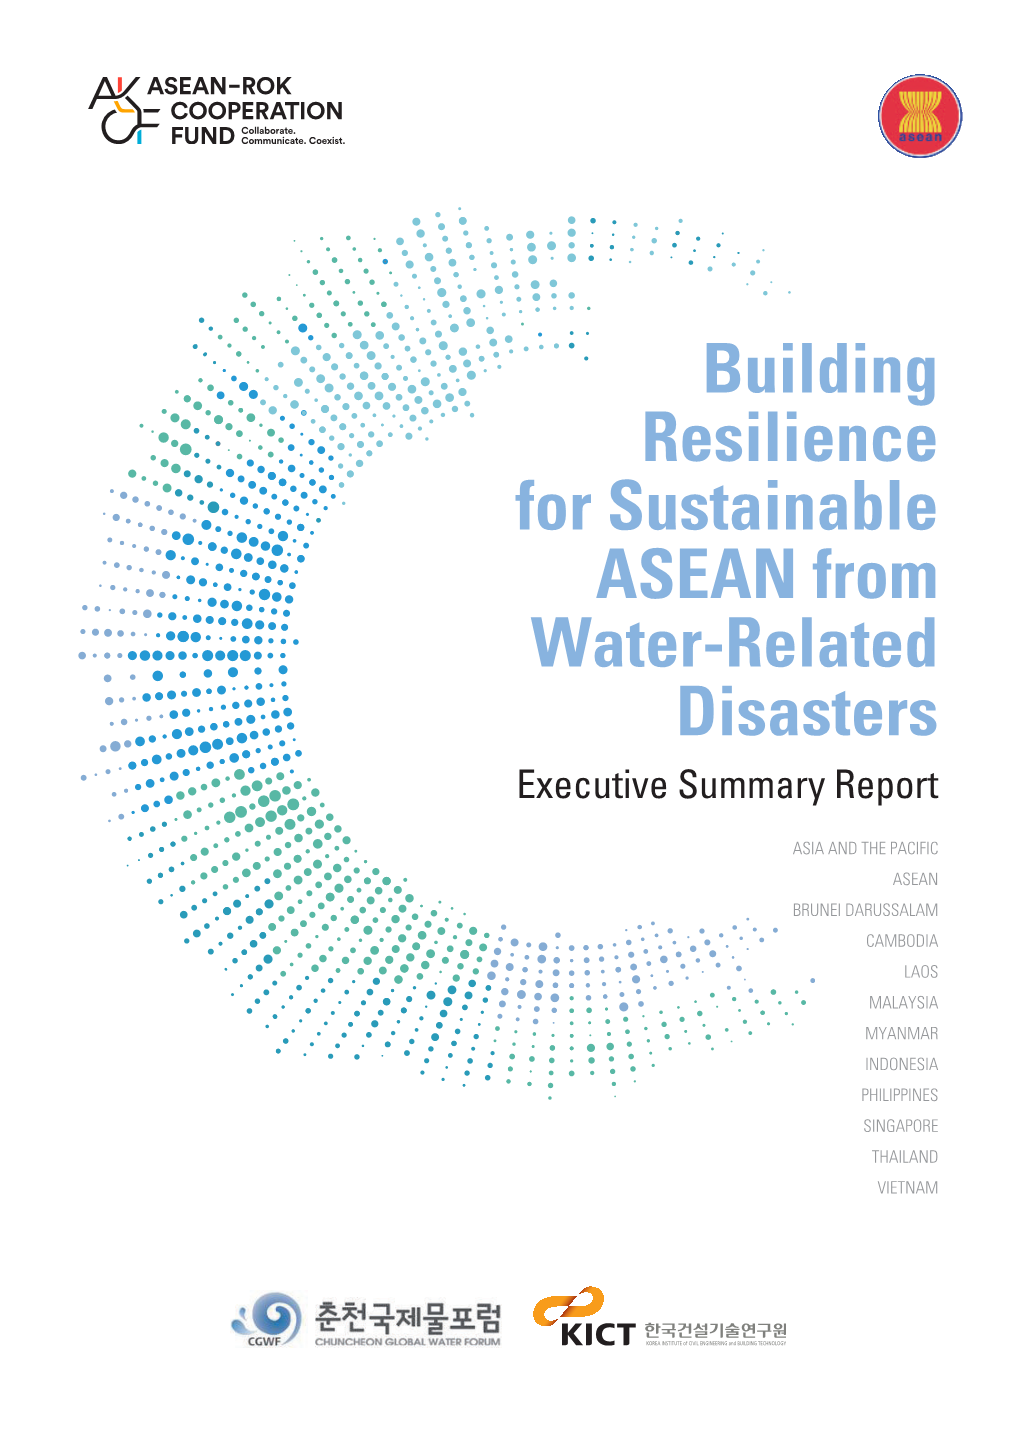 Building Resilience for Sustainable ASEAN from Water-Related Disasters Executive Summary Report